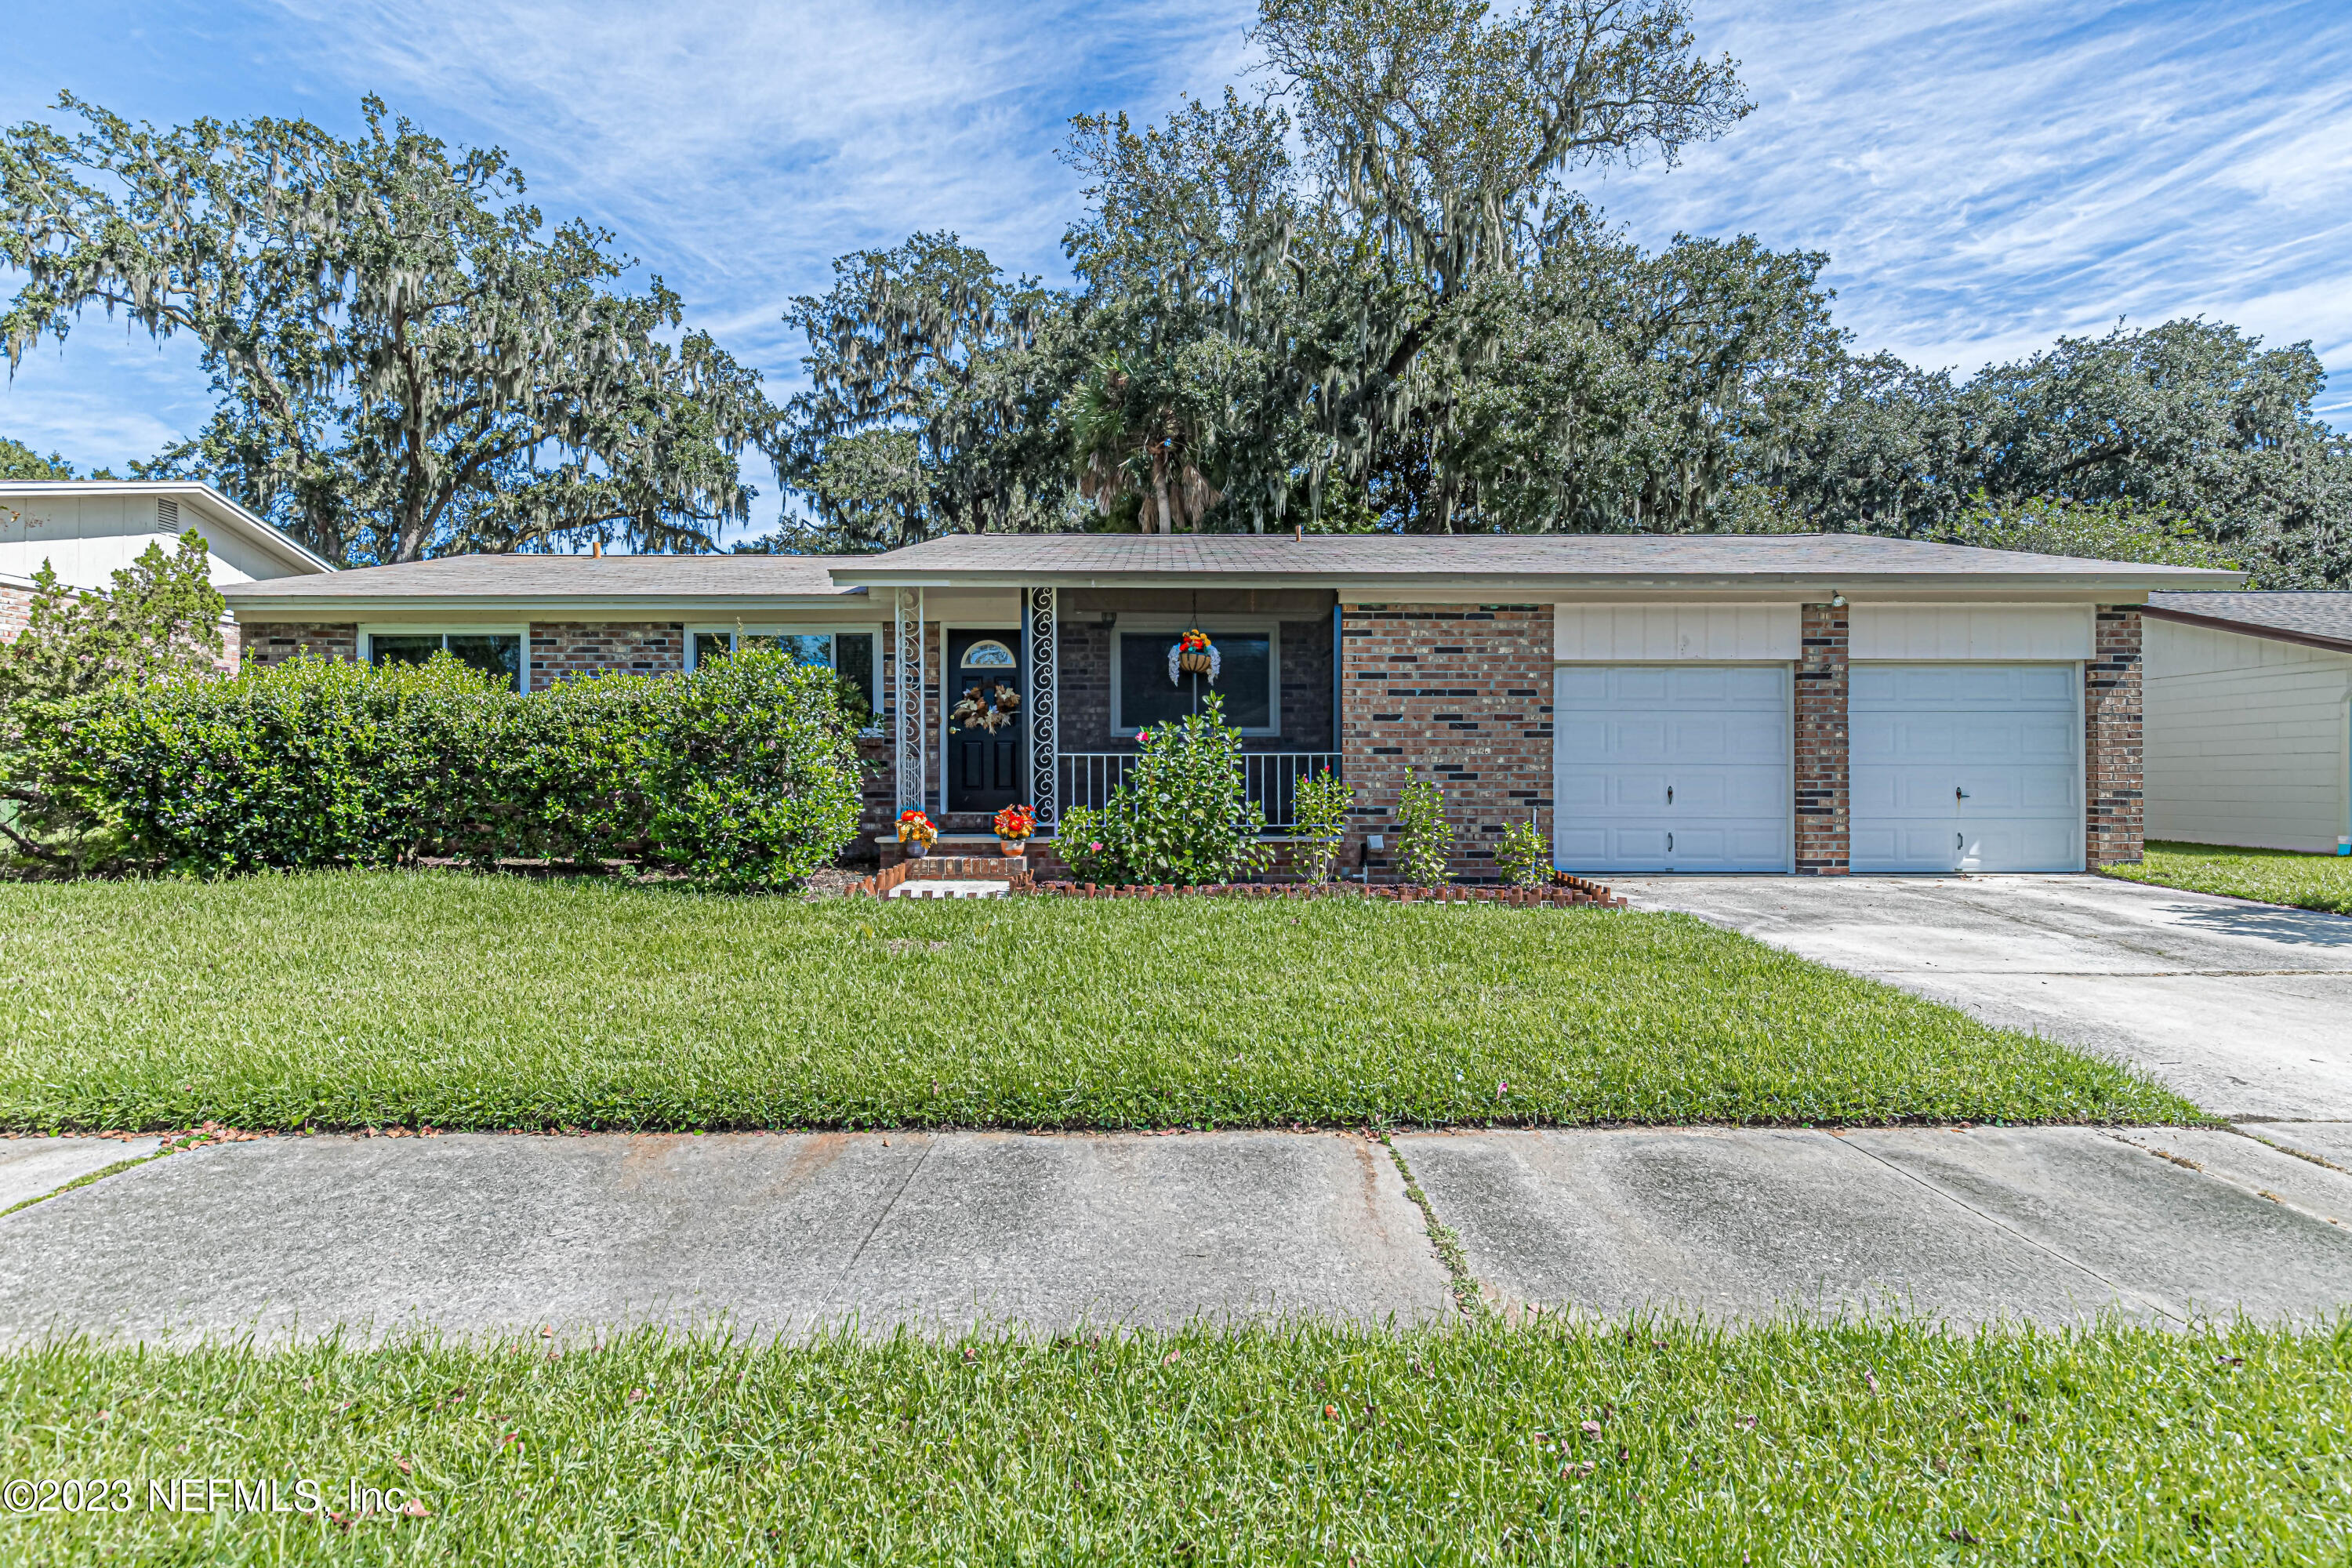 Jacksonville Beach, FL home for sale located at 2515 INDEPENDENCE Drive, Jacksonville Beach, FL 32250